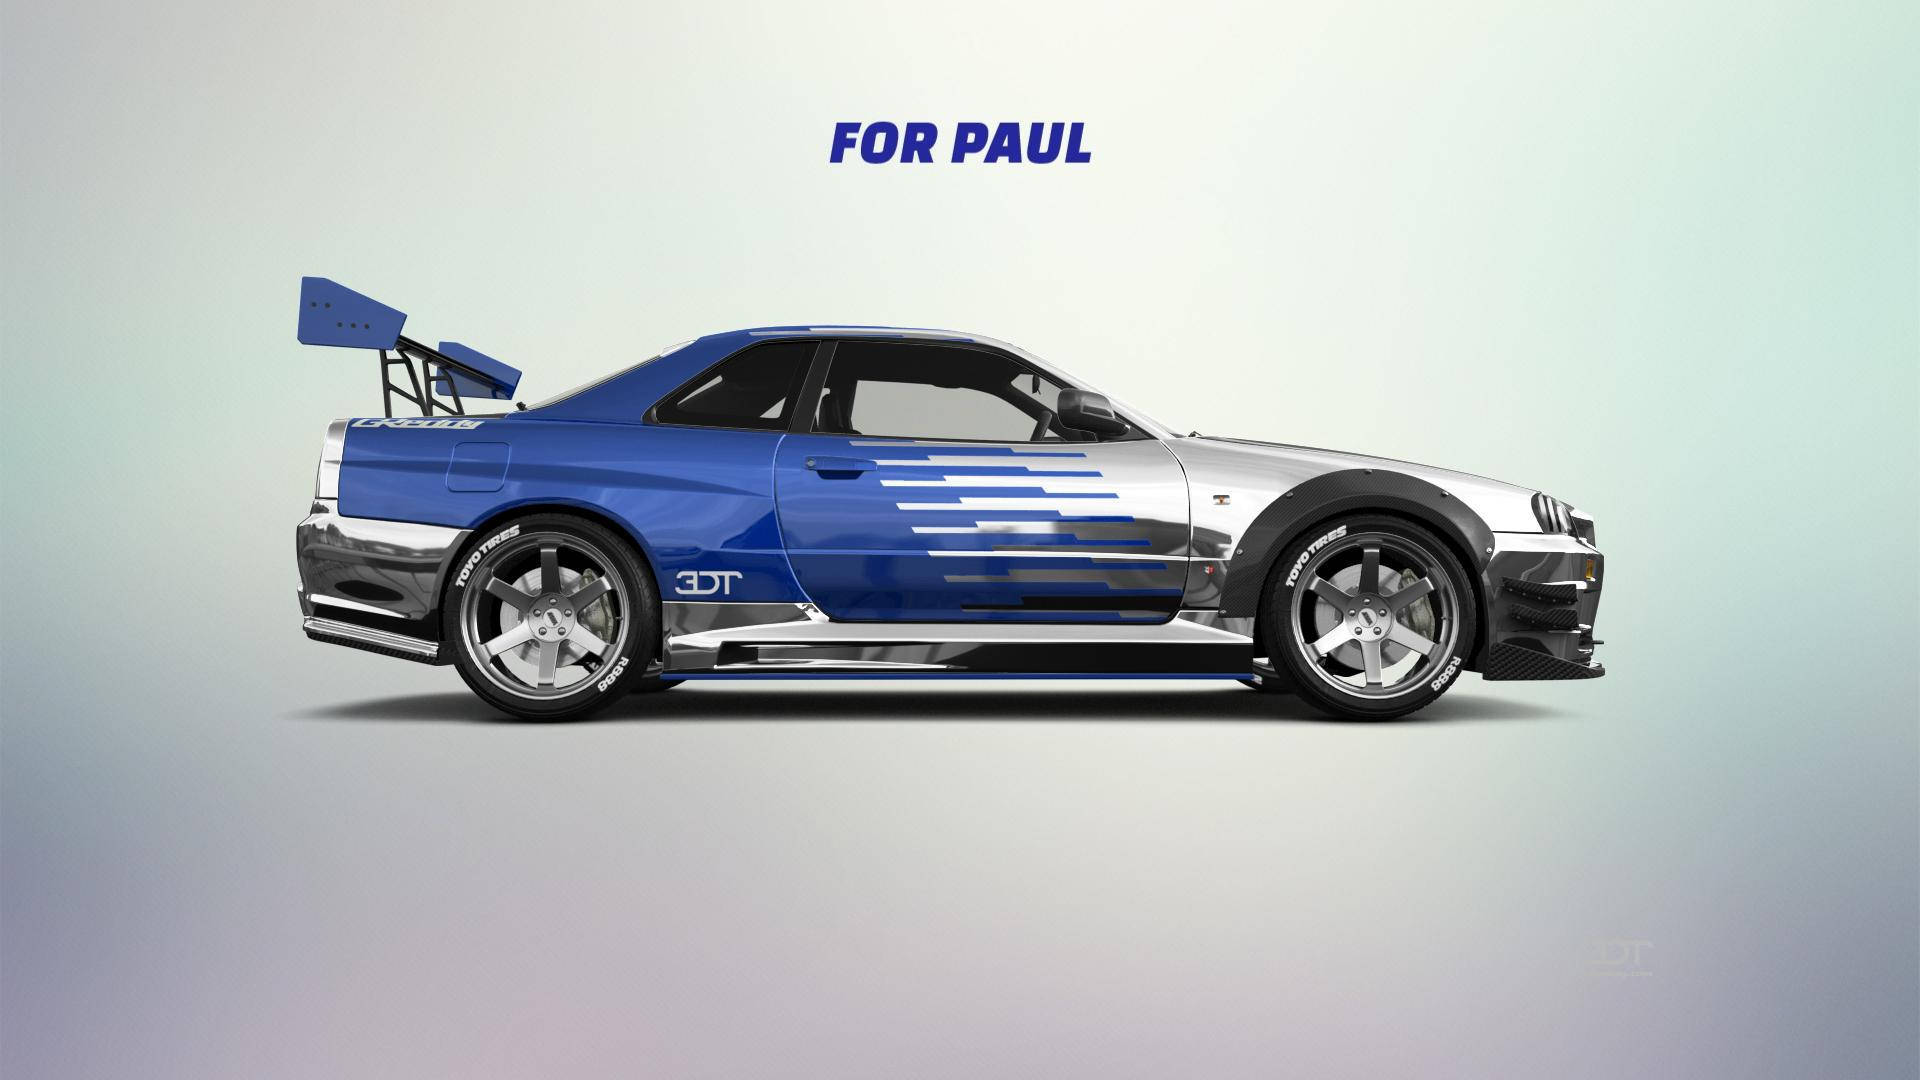 Paul Walker and his car - Fast and Furious Wallpaper